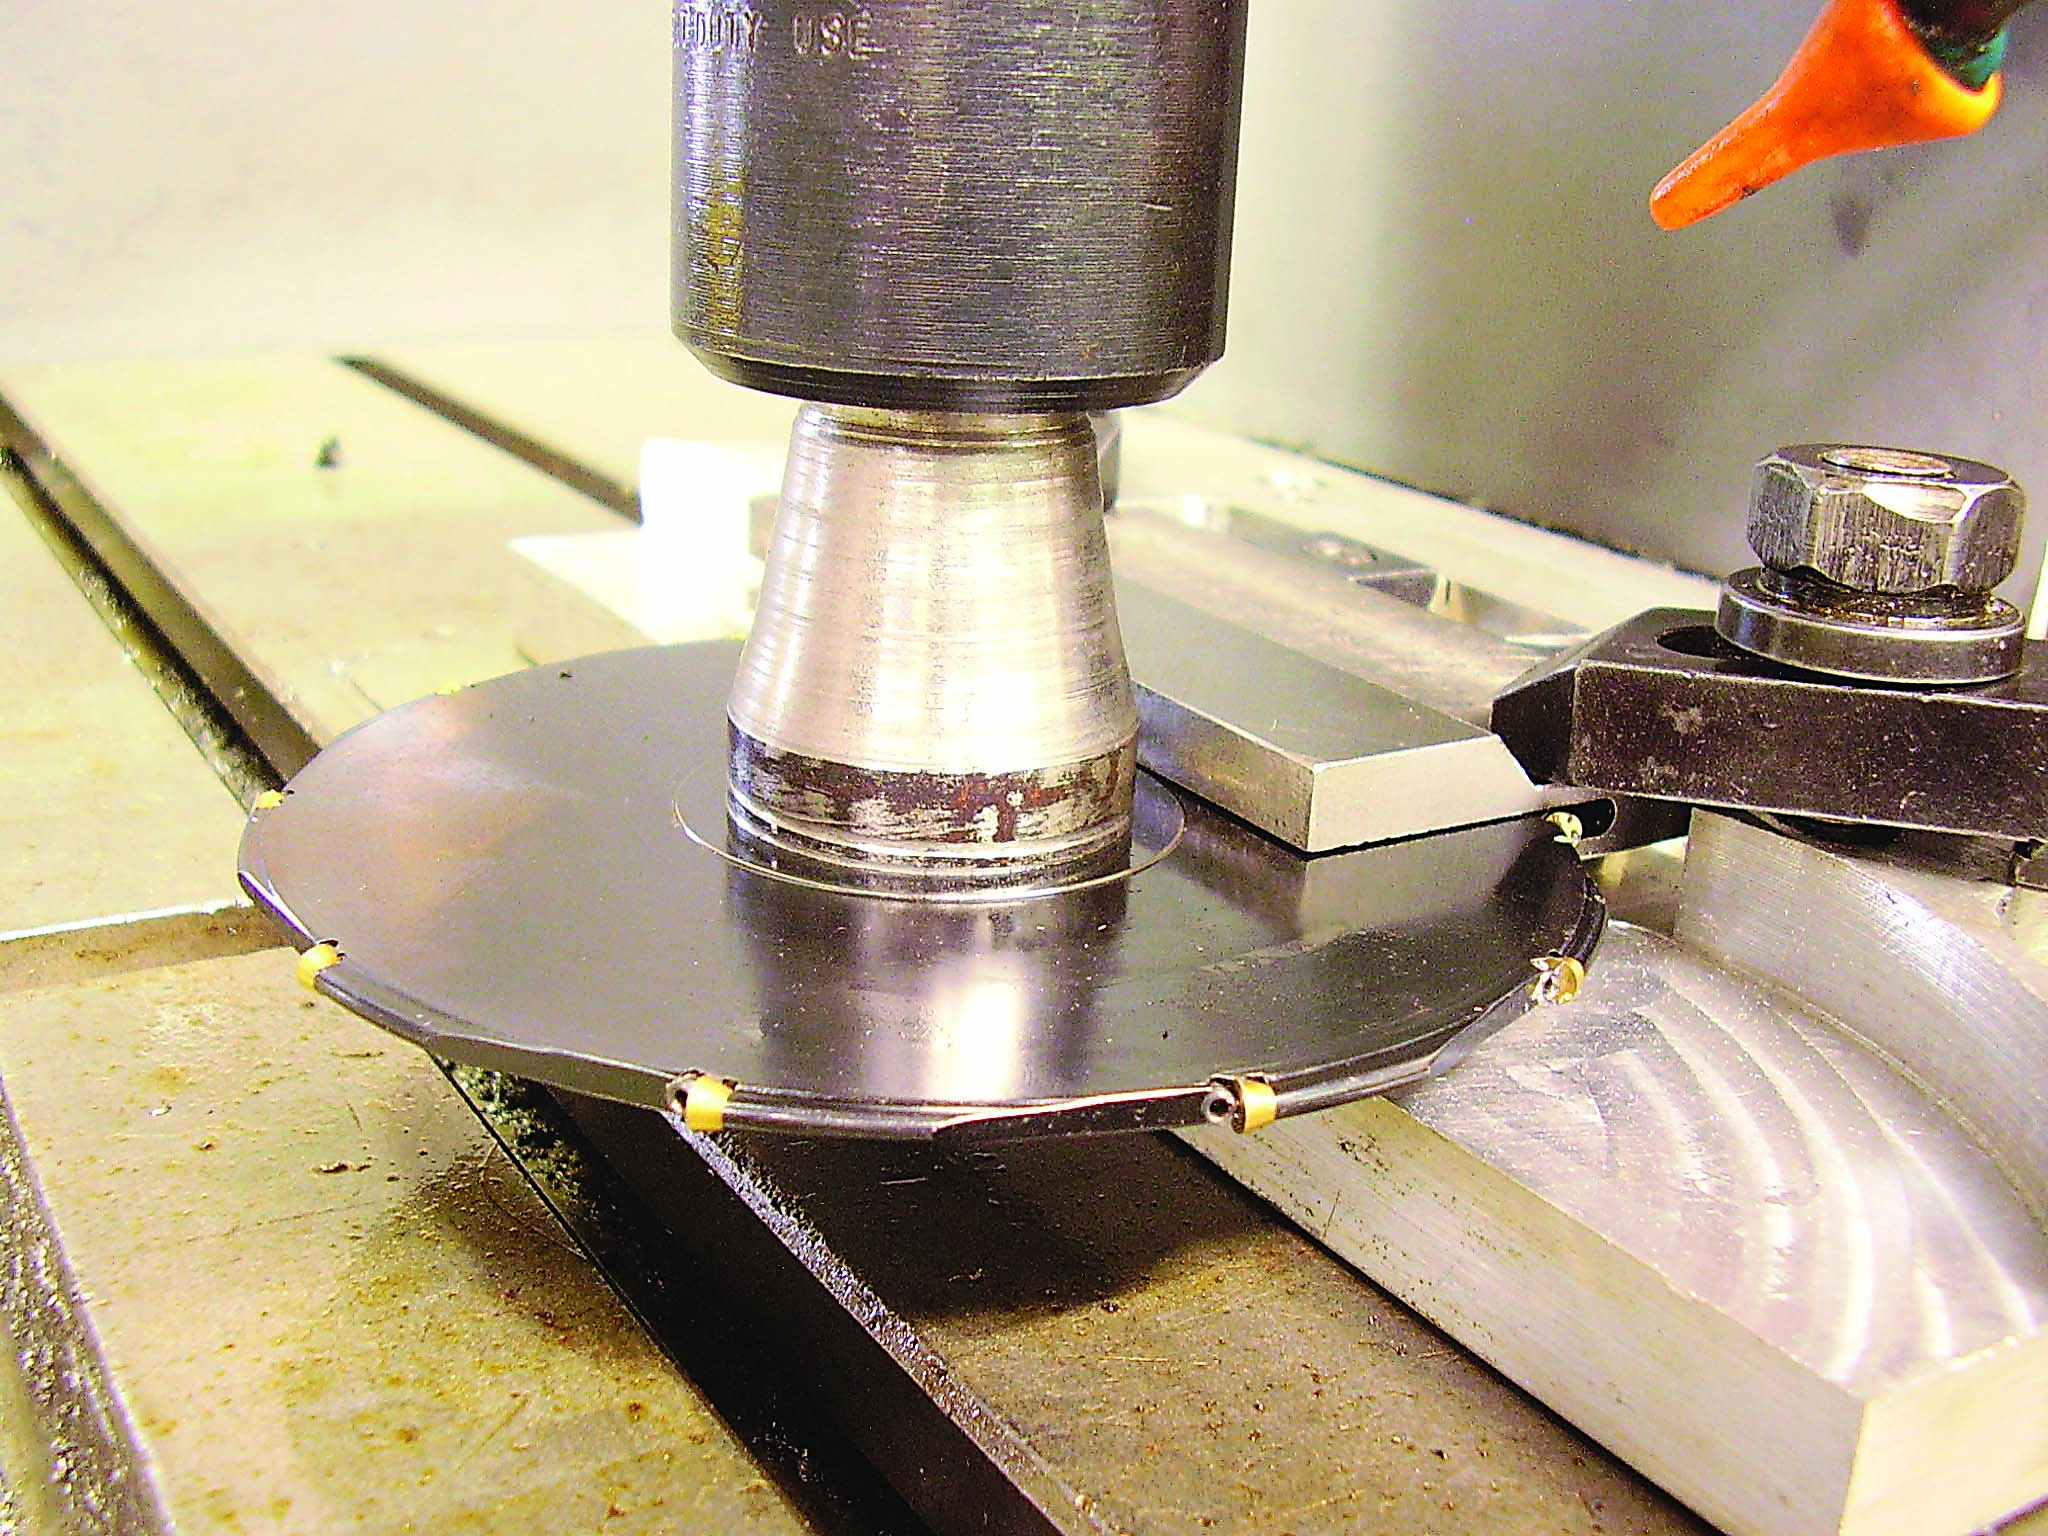 The machining setup is shown above with the cutter in the slot.